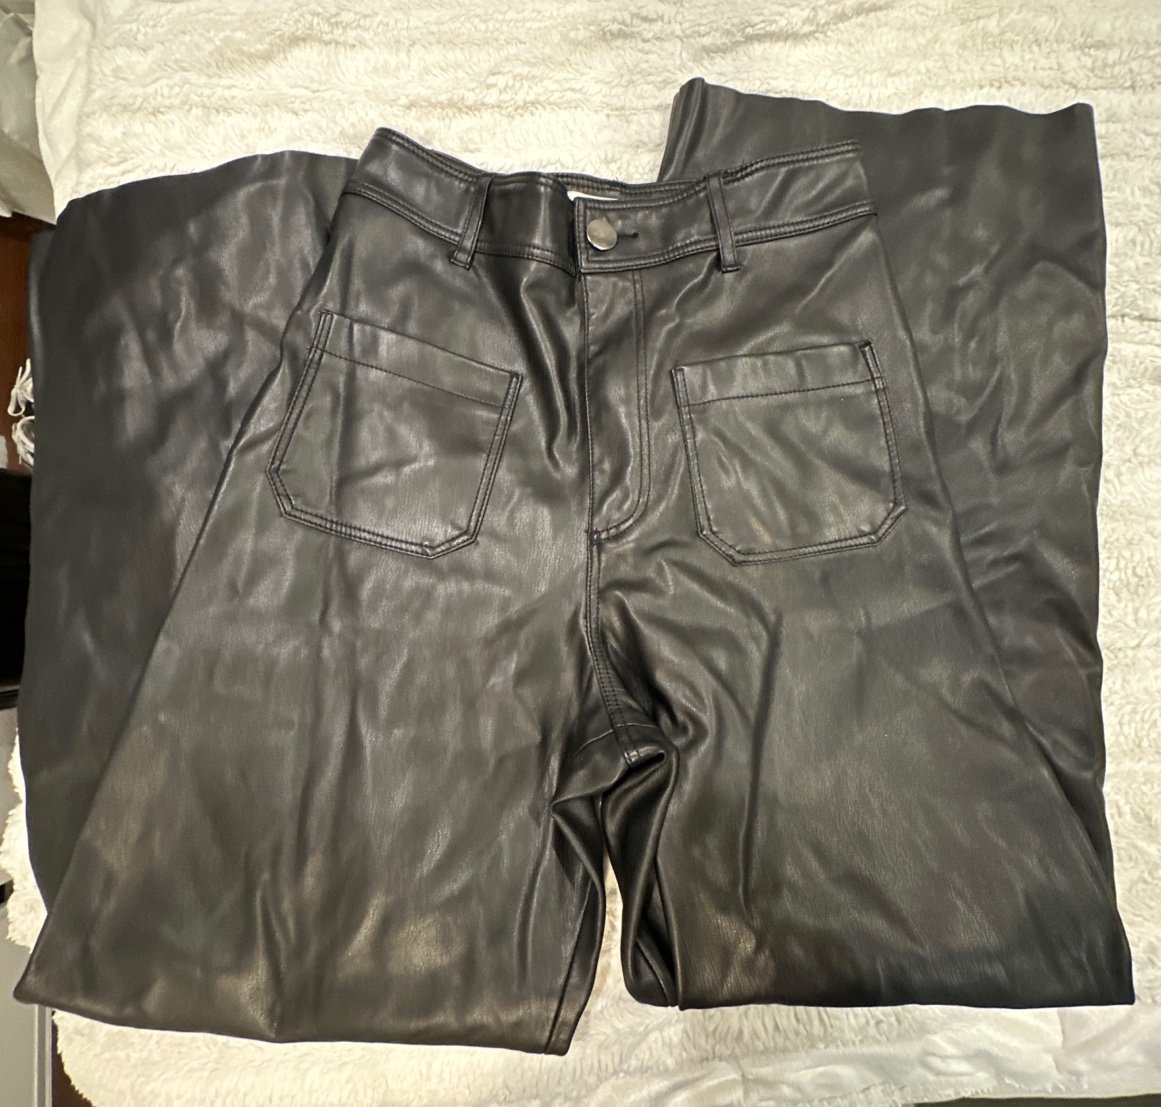 Classic Zara leather pants J6vL7knBT just for you